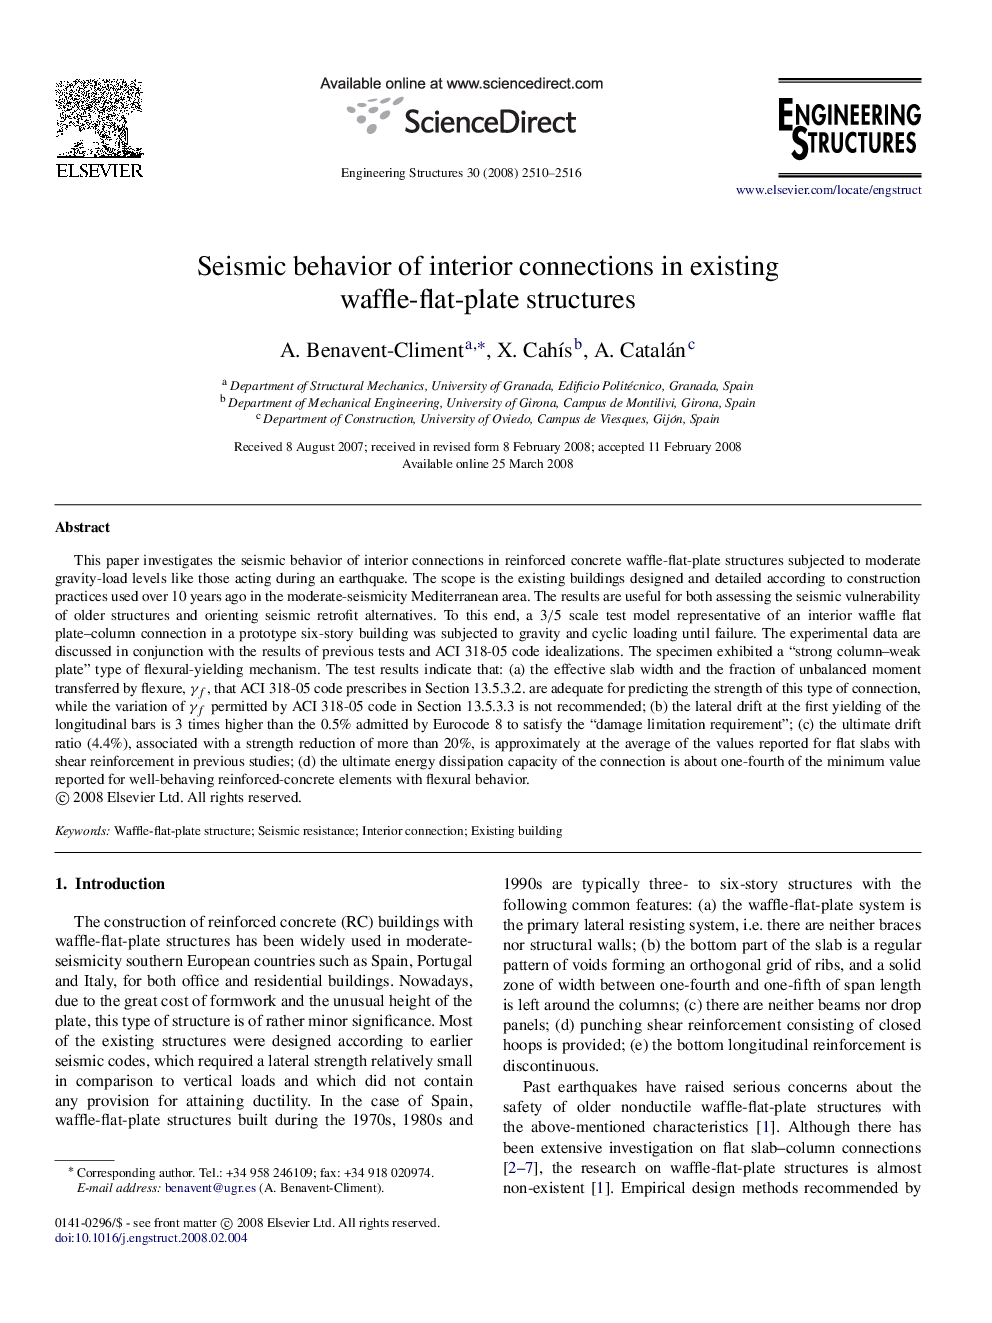 Seismic behavior of interior connections in existing waffle-flat-plate structures